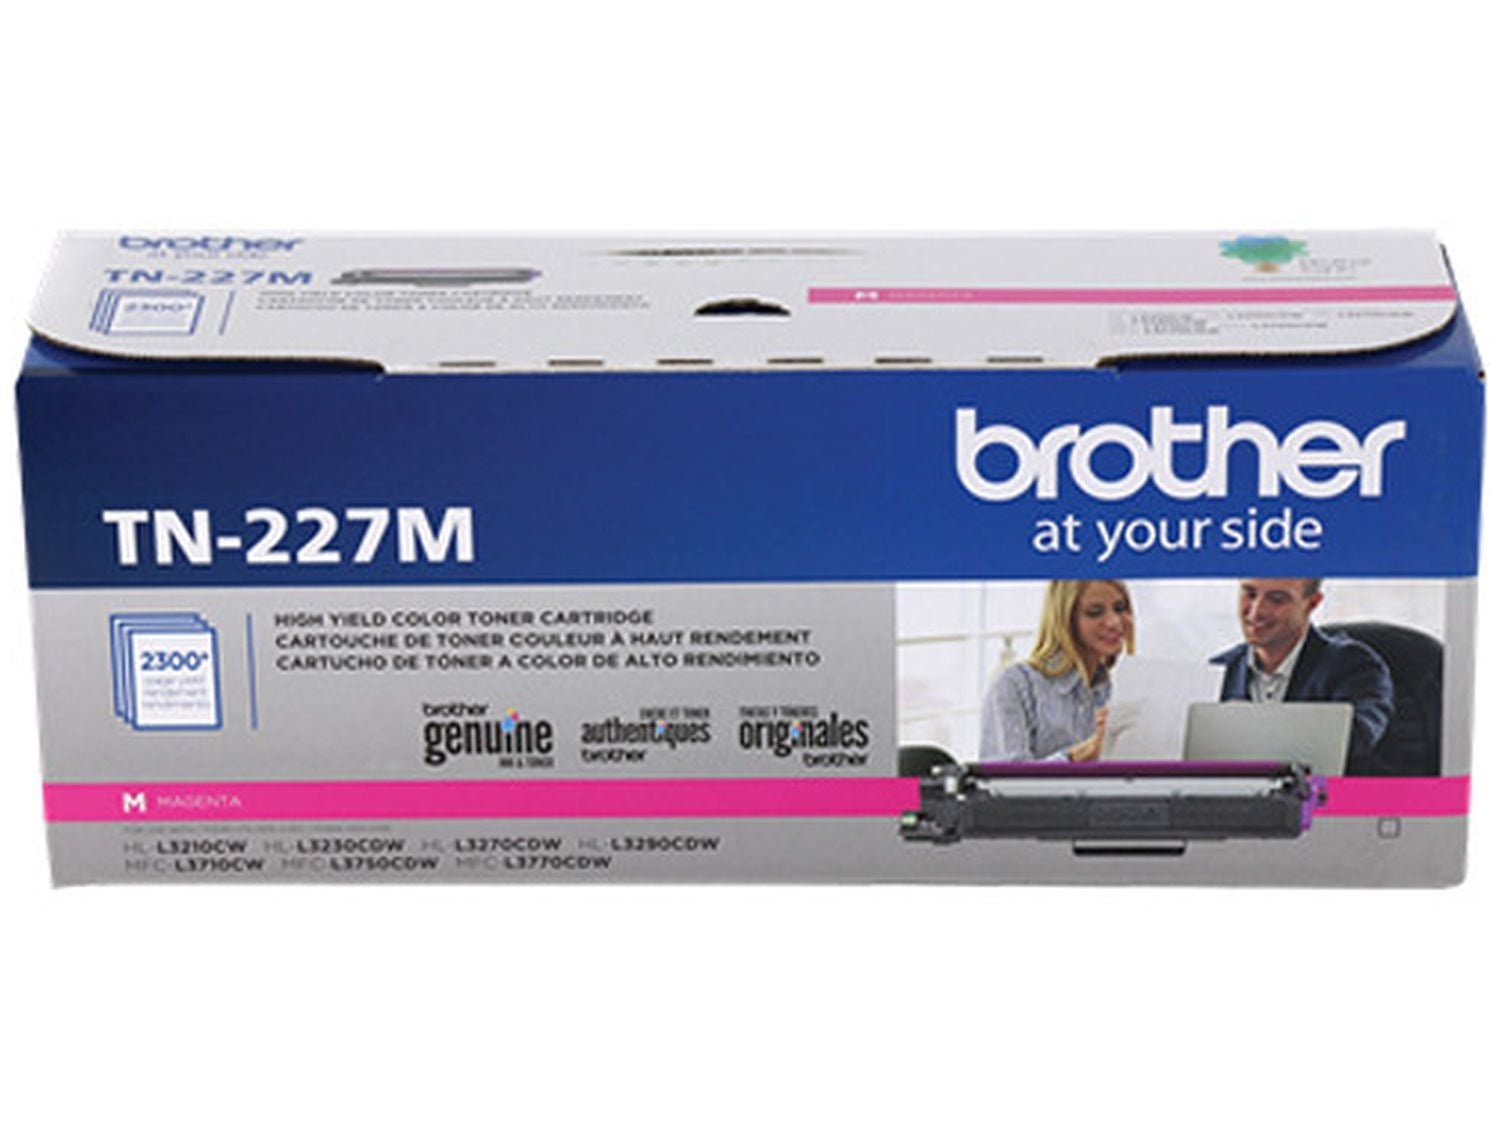 ICU Compatible/ OEM Get Brother ICU-TN-227-M Yields 2300 Pages TN-227 Magenta High Yield 2300 Pages Toner Cartridge (TN227M)